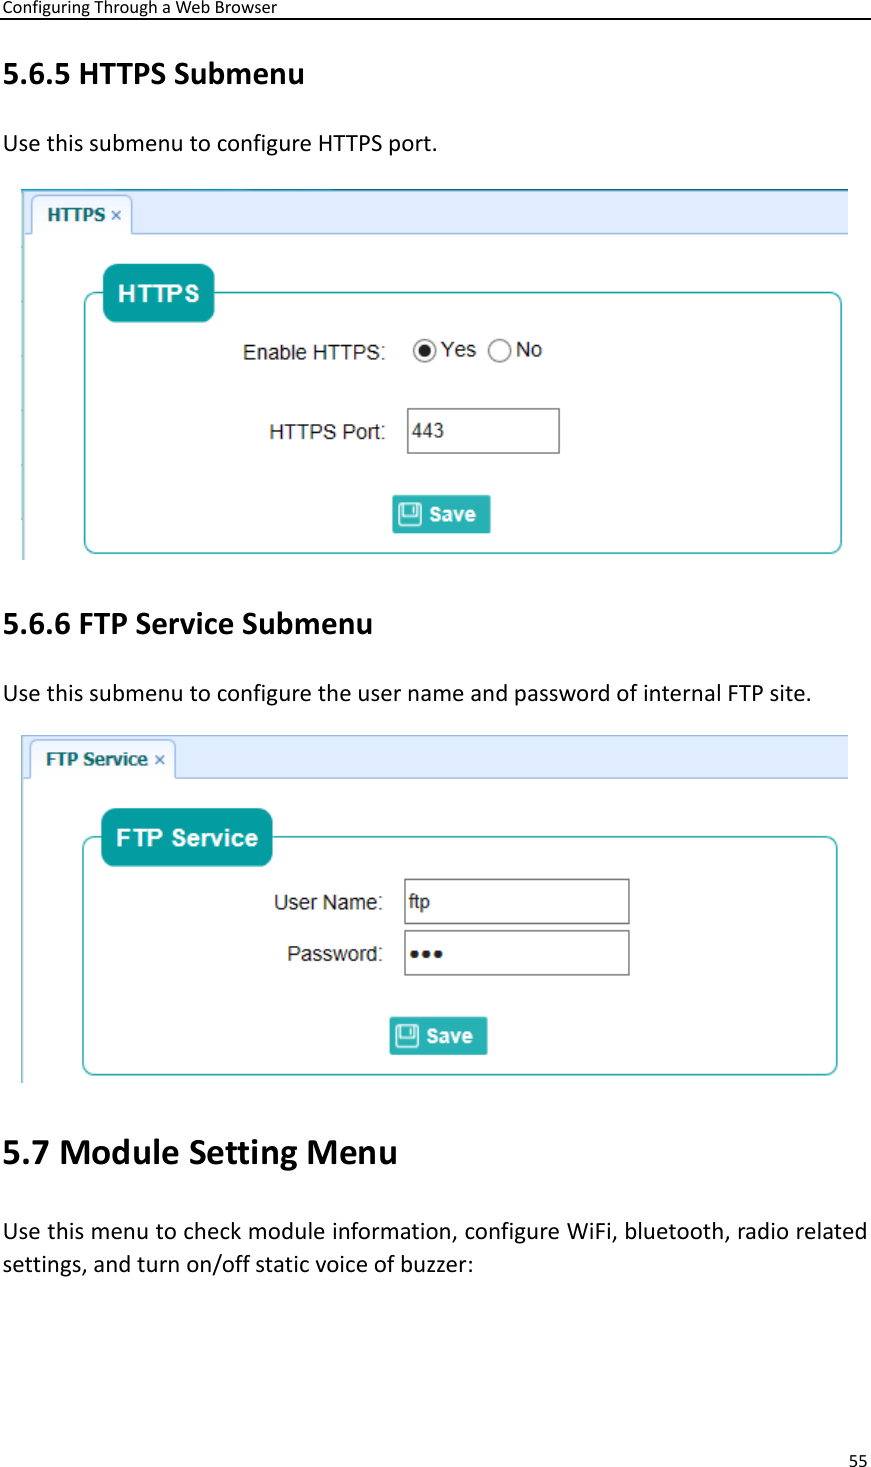 Configuring Through a Web Browser 55  5.6.5 HTTPS Submenu Use this submenu to configure HTTPS port.  5.6.6 FTP Service Submenu Use this submenu to configure the user name and password of internal FTP site.  5.7 Module Setting Menu Use this menu to check module information, configure WiFi, bluetooth, radio related settings, and turn on/off static voice of buzzer:   